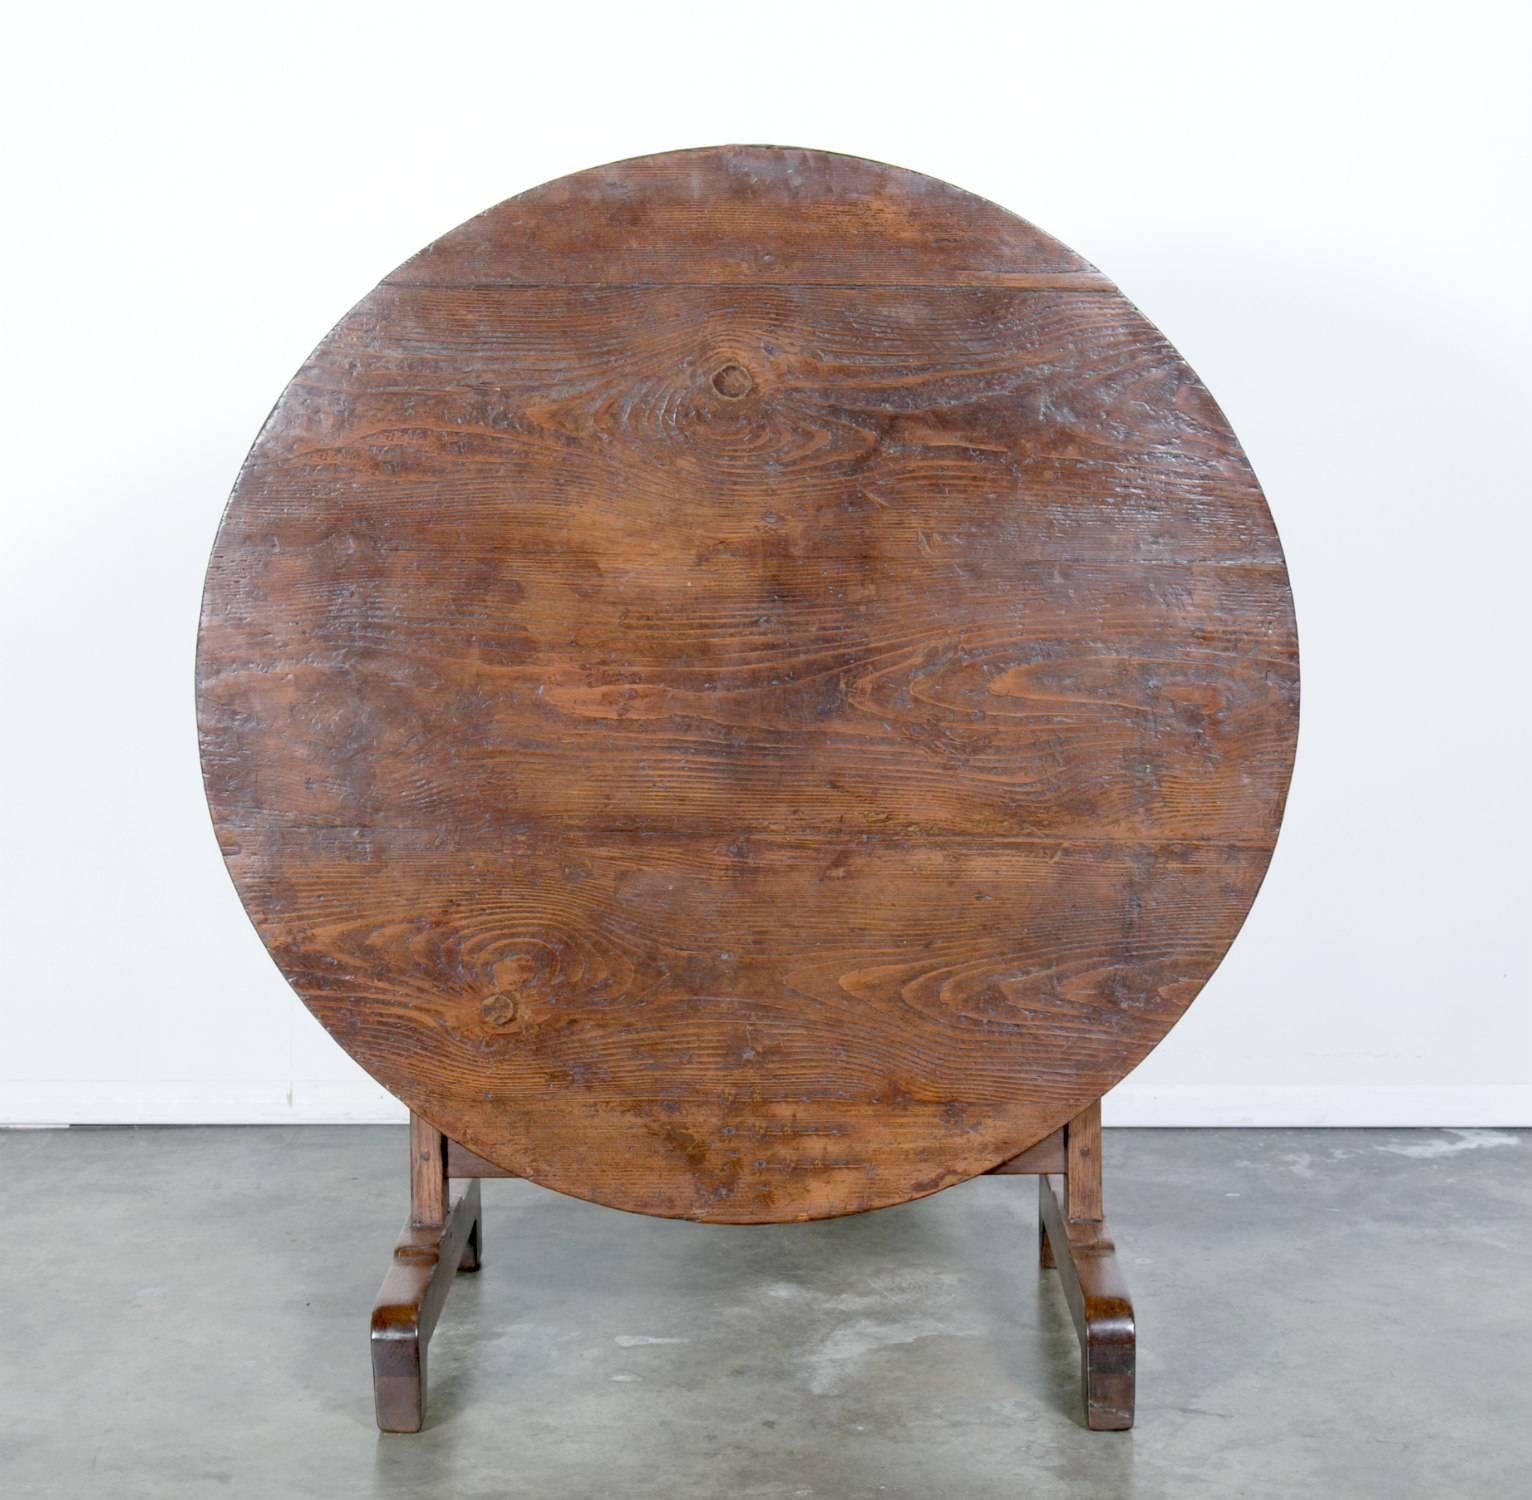 This French wine table with typical tilt-top dates back to the 1850s and features visible wood grain patterning on the pine table top. The base is chestnut. Table has a rich color and nice patina. These tables were originally used in the vineyards